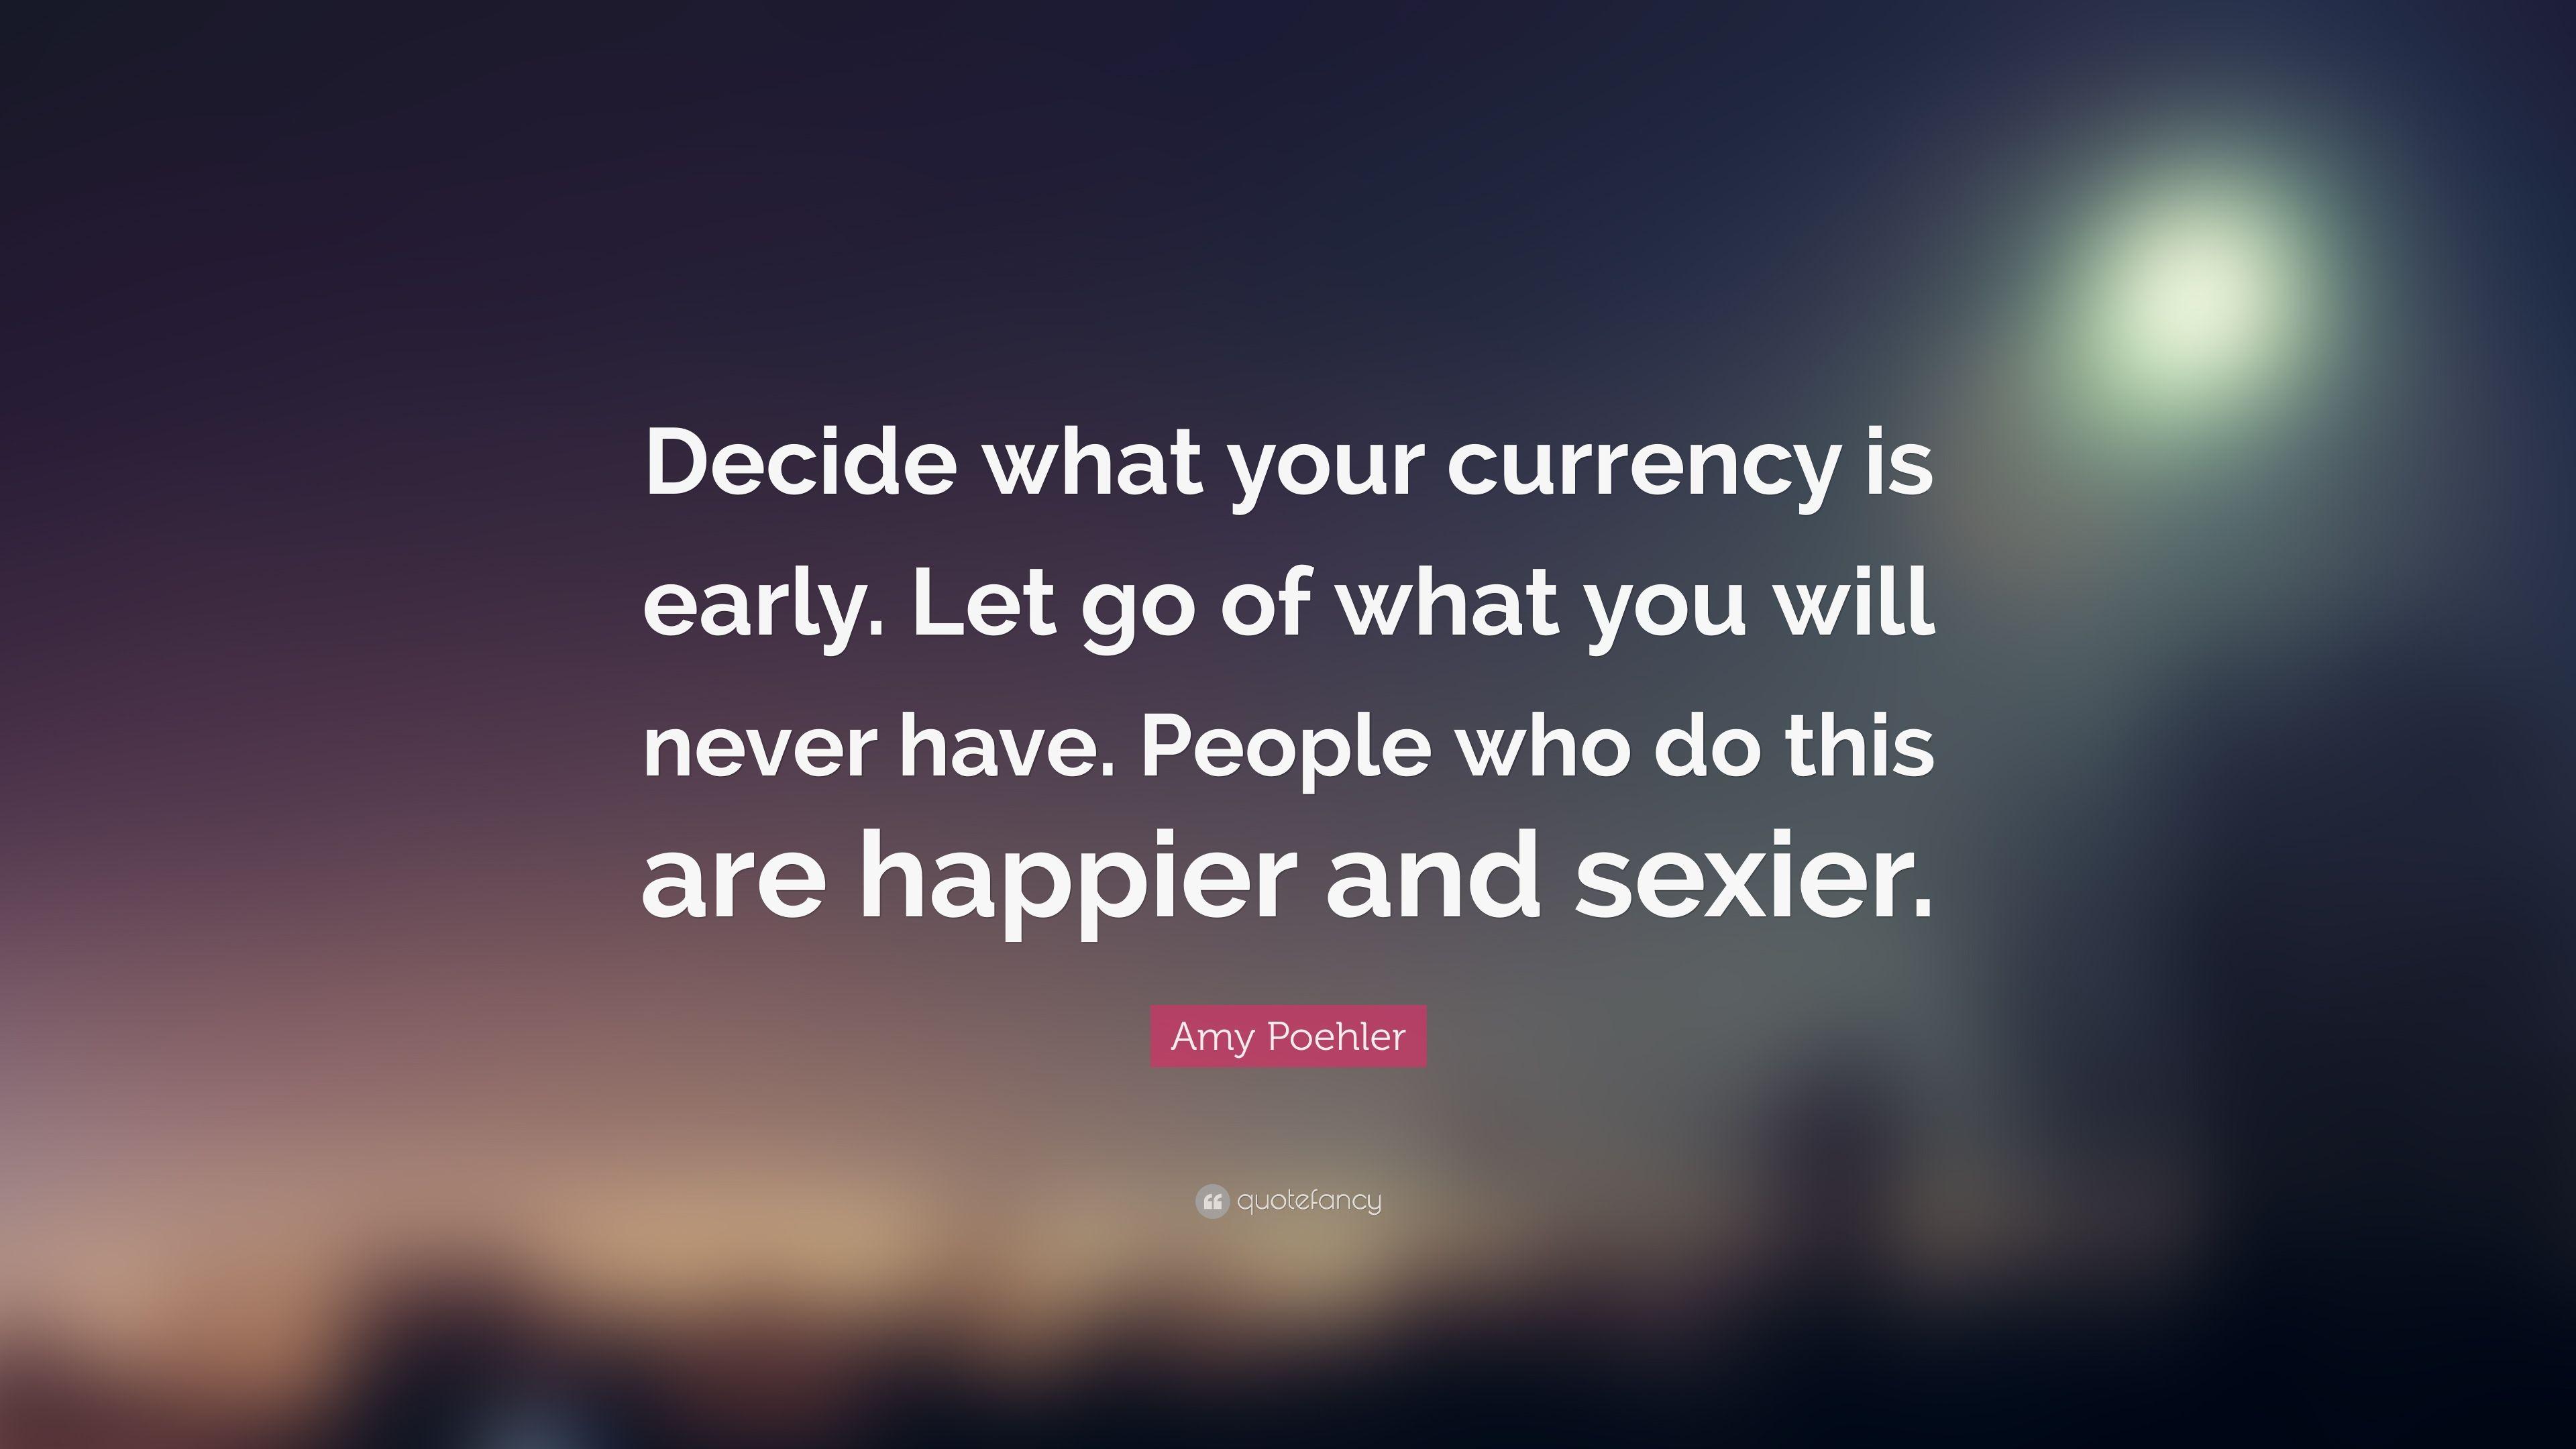 Amy Poehler Quote: “Decide what your currency is early. Let go